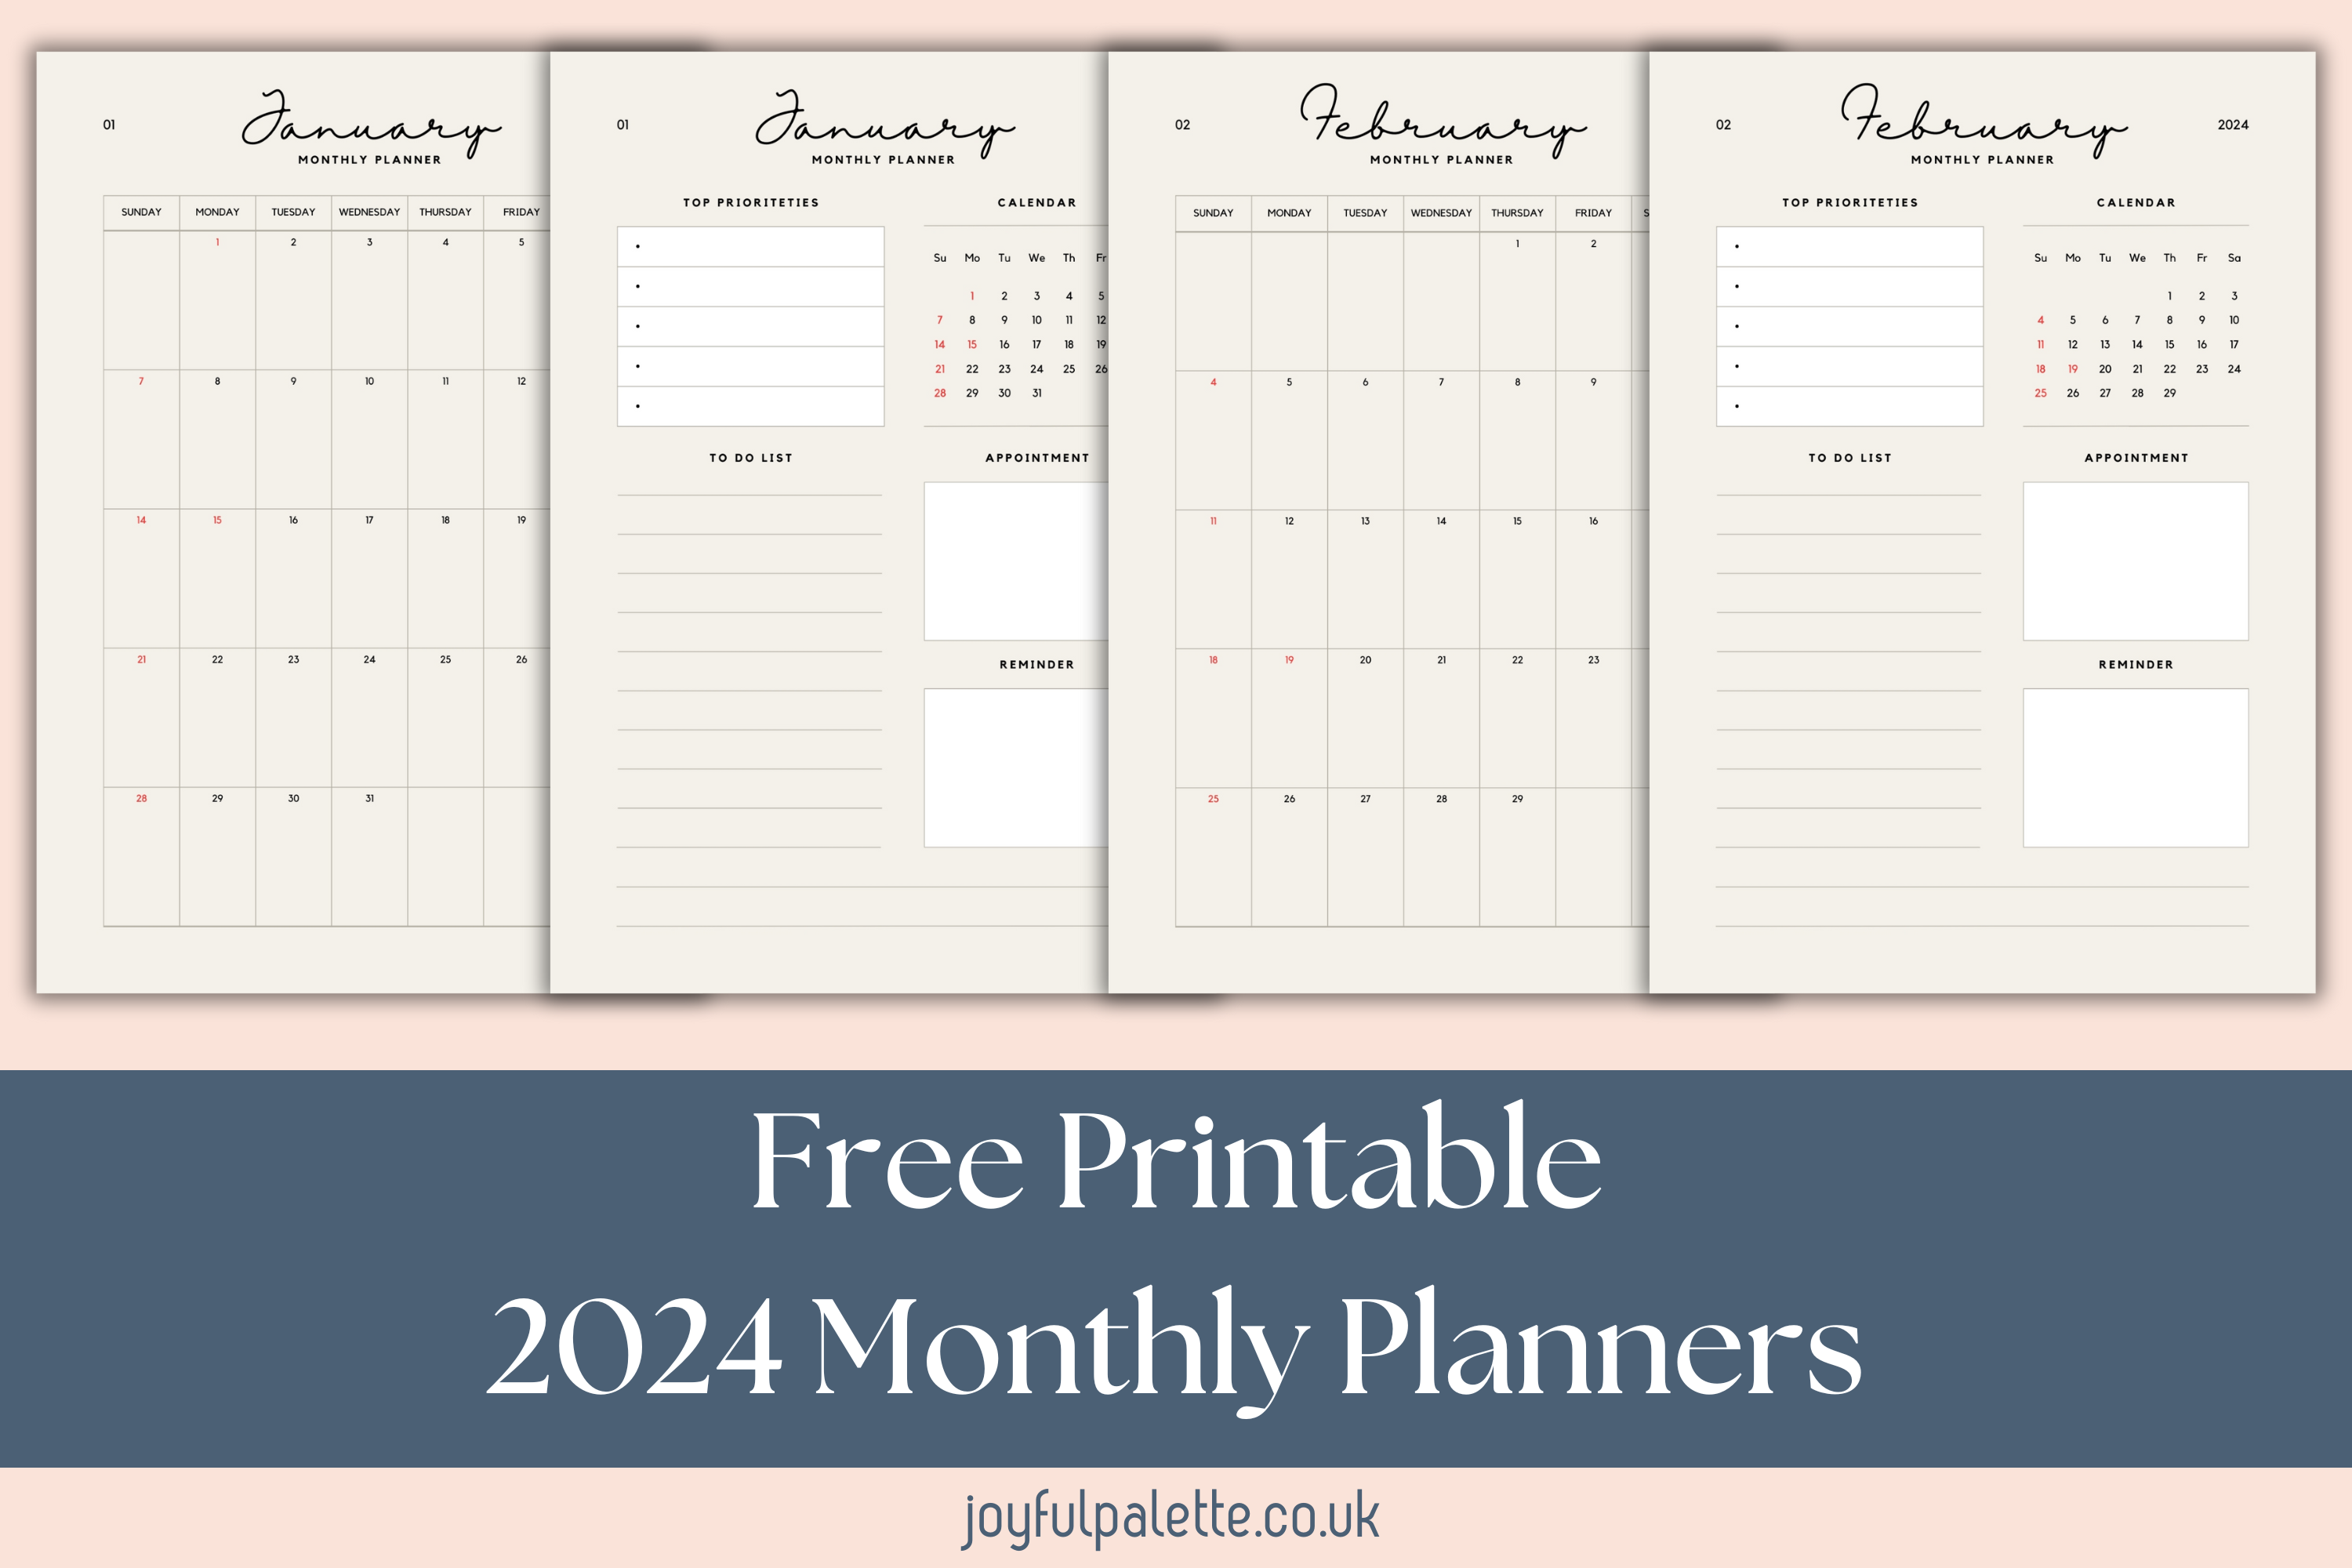 Free Printable 2024 Monthly Planner PDF